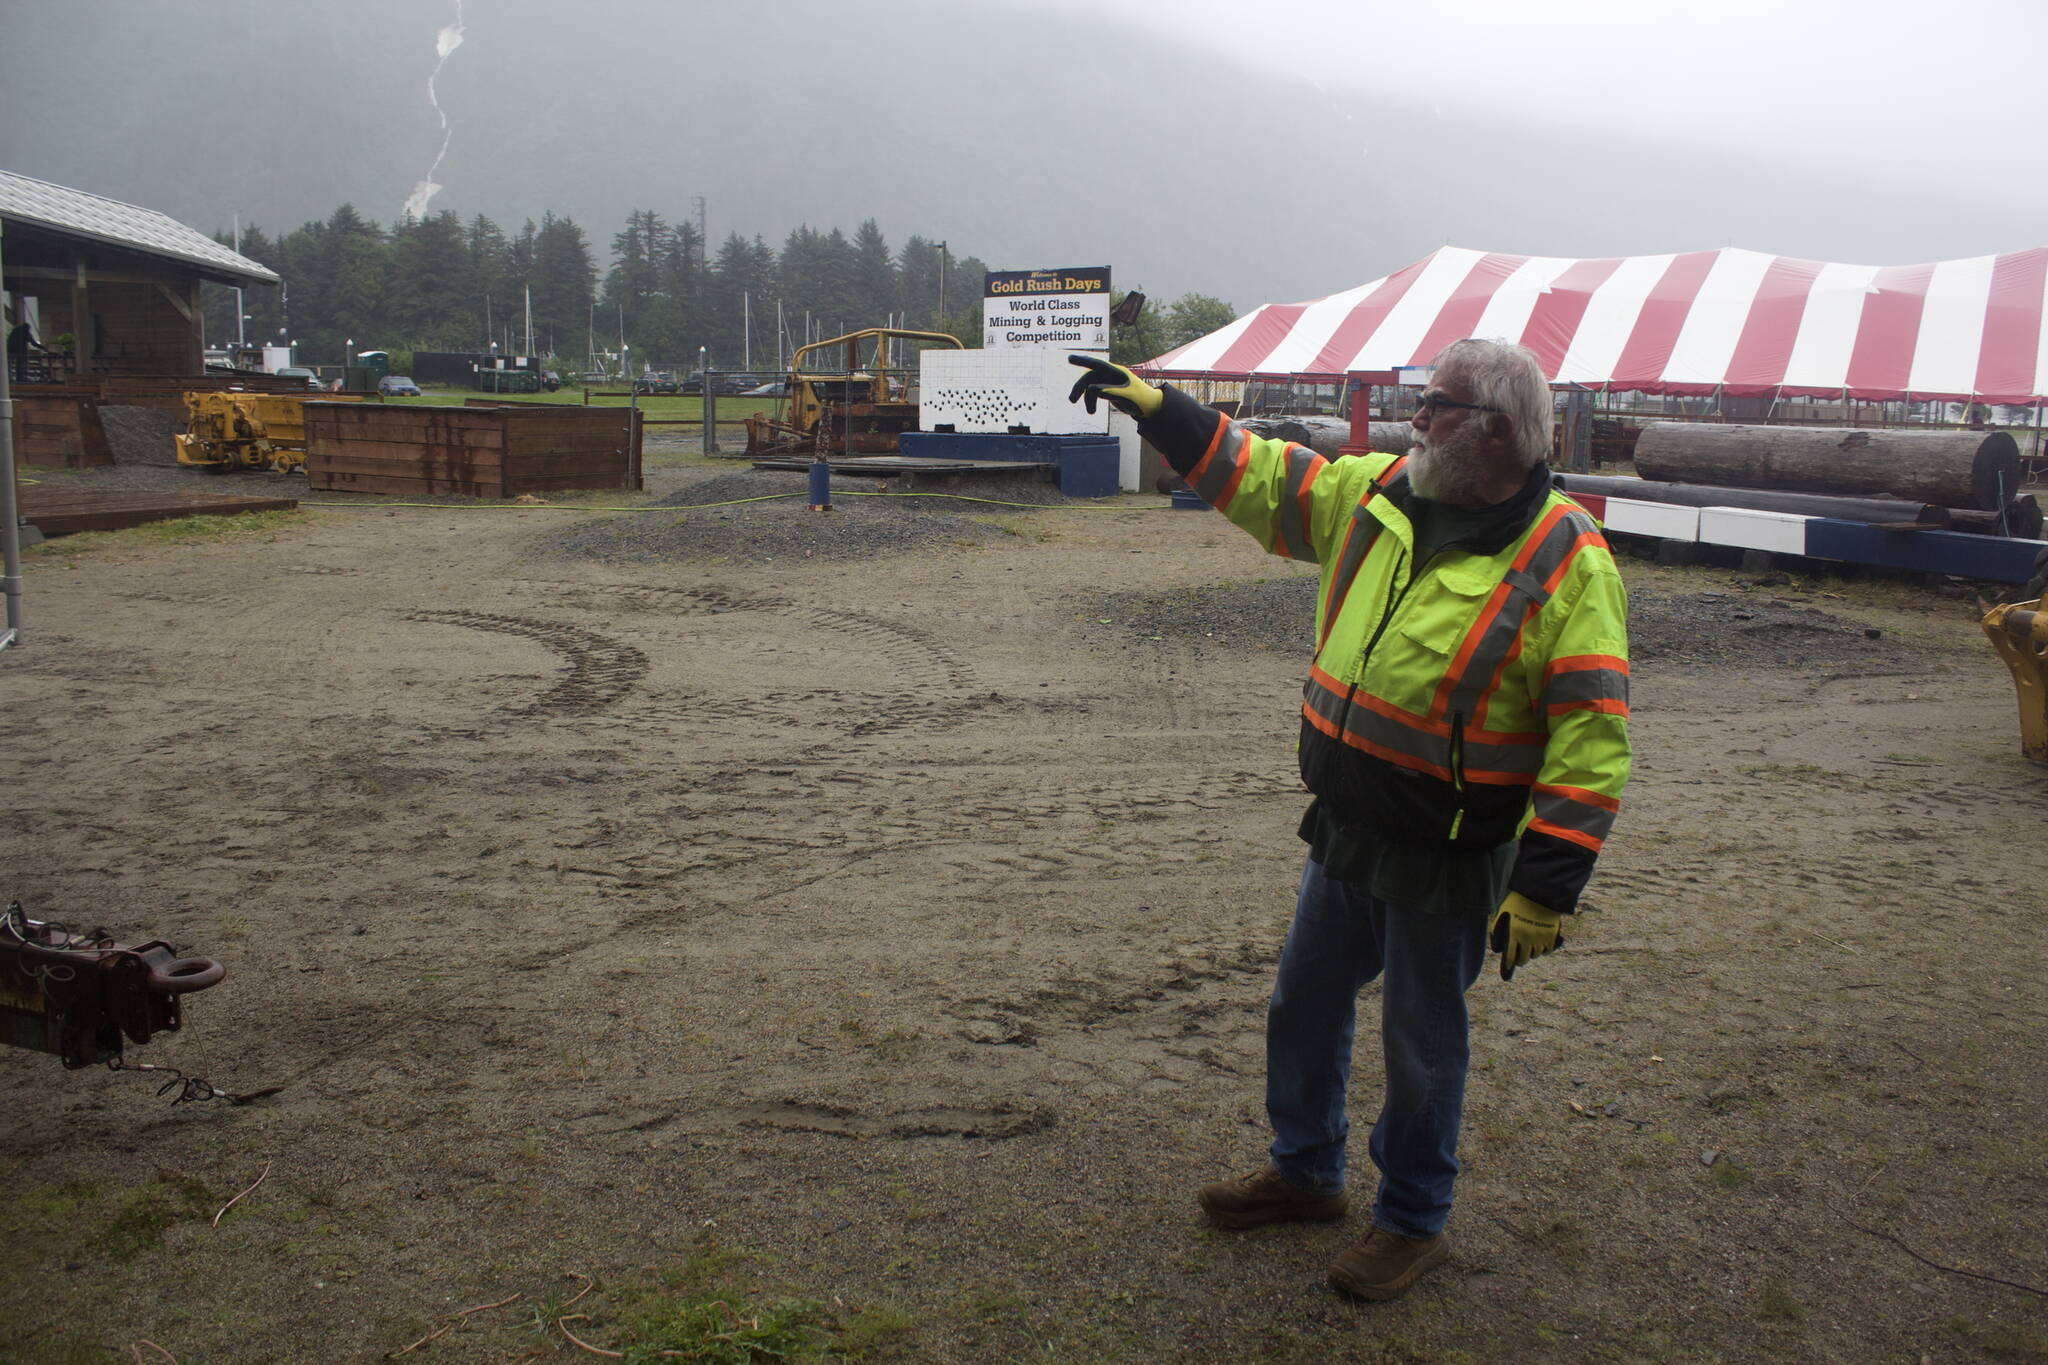 Jerry Harmon, president of Juneau Gold Rush Days and a miner for more than 40 years, shows some of the nearly 500,000 pounds of heavy equipment being brought to Savikko Field for this weekend’s events. The event has attracted more than 10,000 people at its peak, but was cancelled the past two years due to the COVID-19 pandemic. (Mark Sabbatini / Juneau Empire)